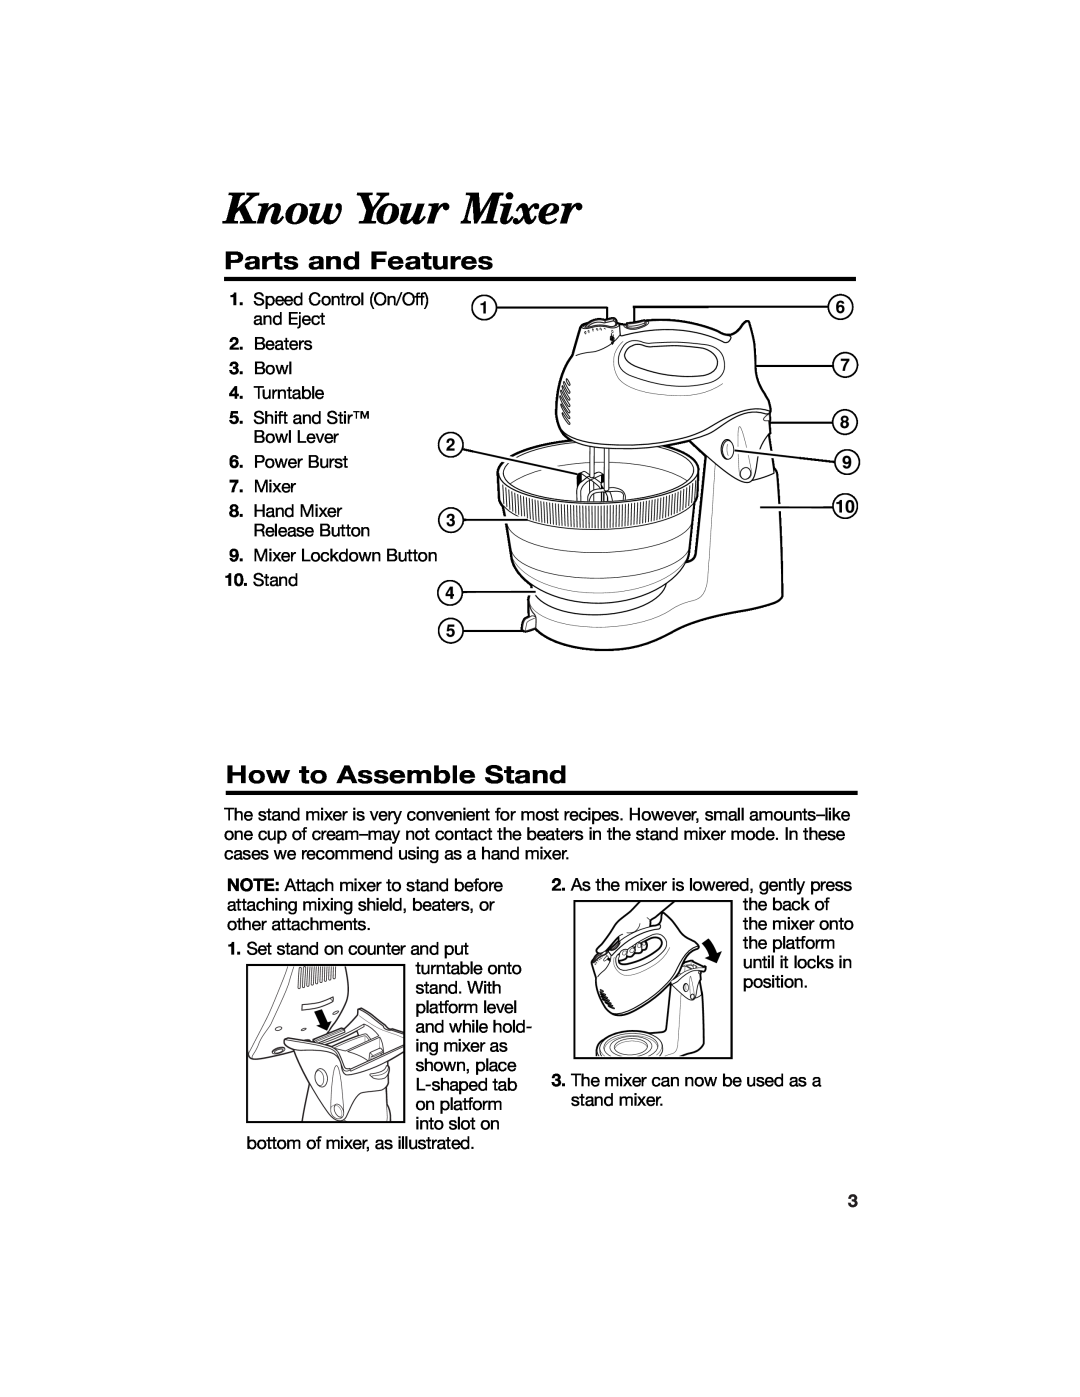 Hamilton Beach 840086200 manual Know Your Mixer, Parts and Features, How to Assemble Stand 